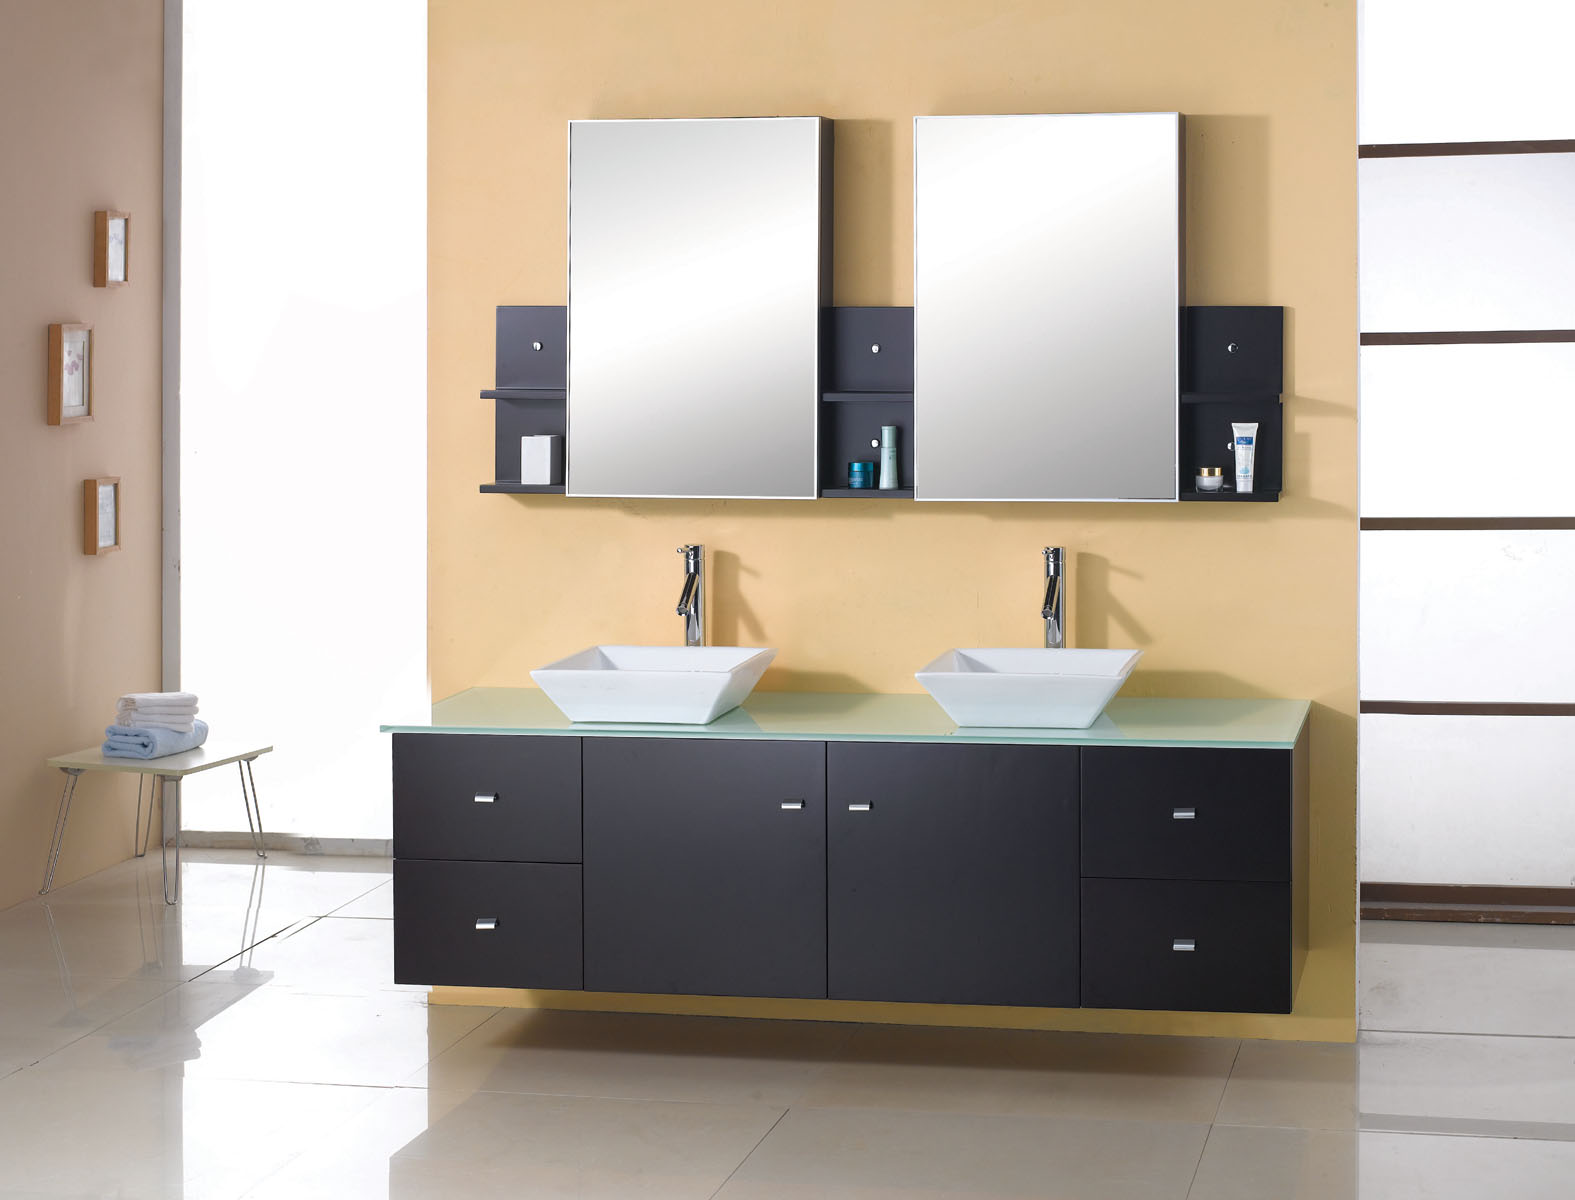 Black Bathroom Set Awesome Black Bathroom Floating Vanity Set With Double Square Sinks Under Rectangular Mirrors Attached On Khaki Wall Paint Color Background Bathroom  Double Function From Double Sink Vanity 